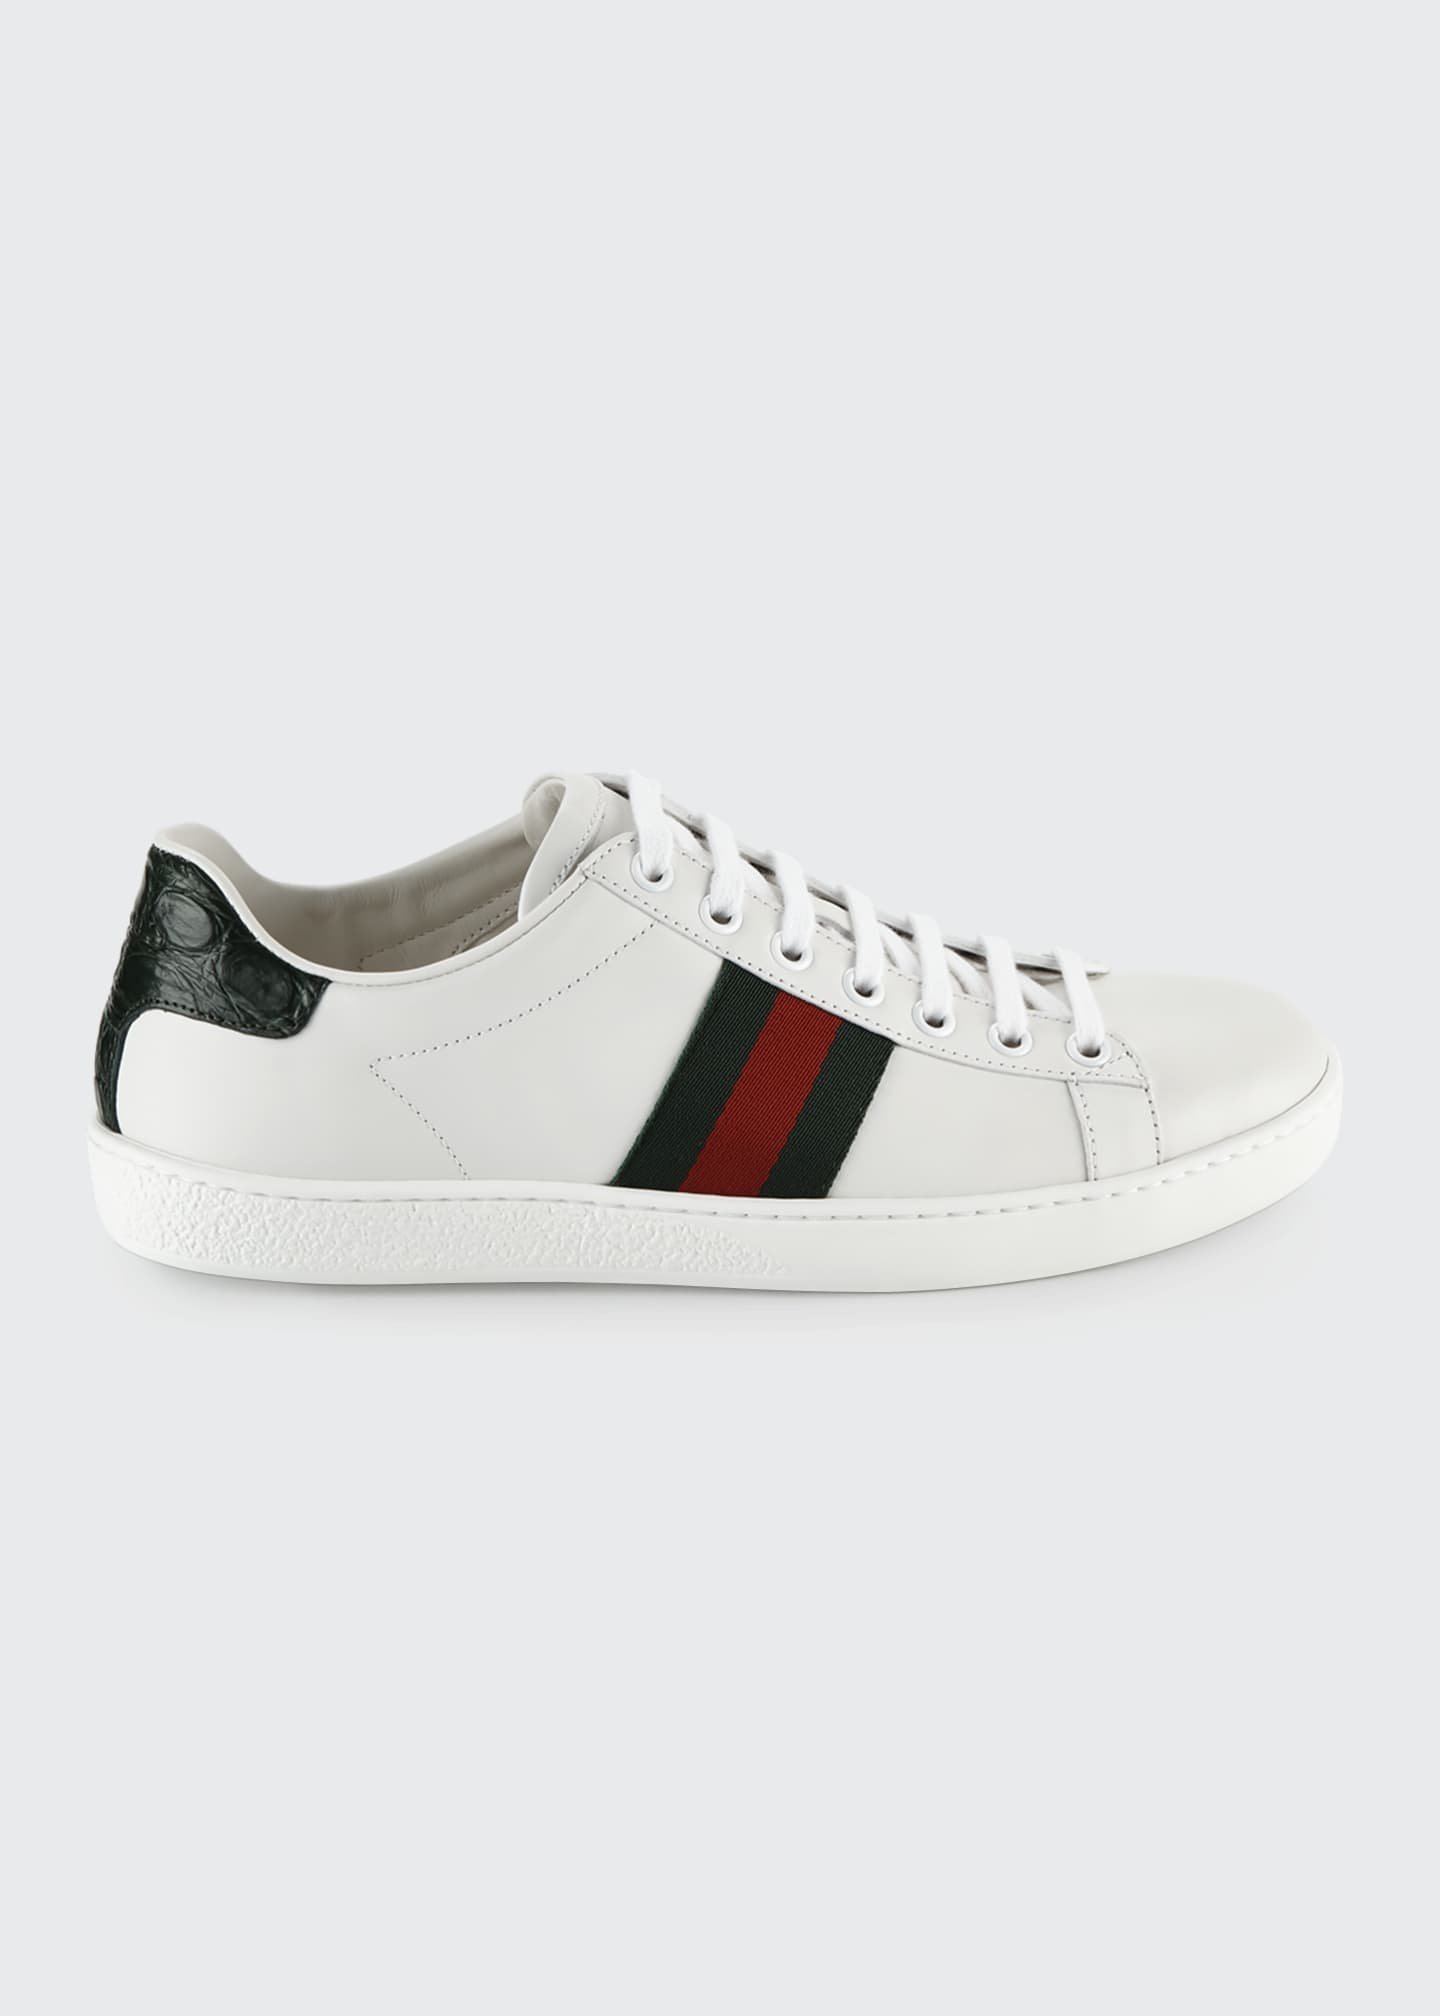 Gucci Ace Star & Bee Sneakers Image 1 of 5